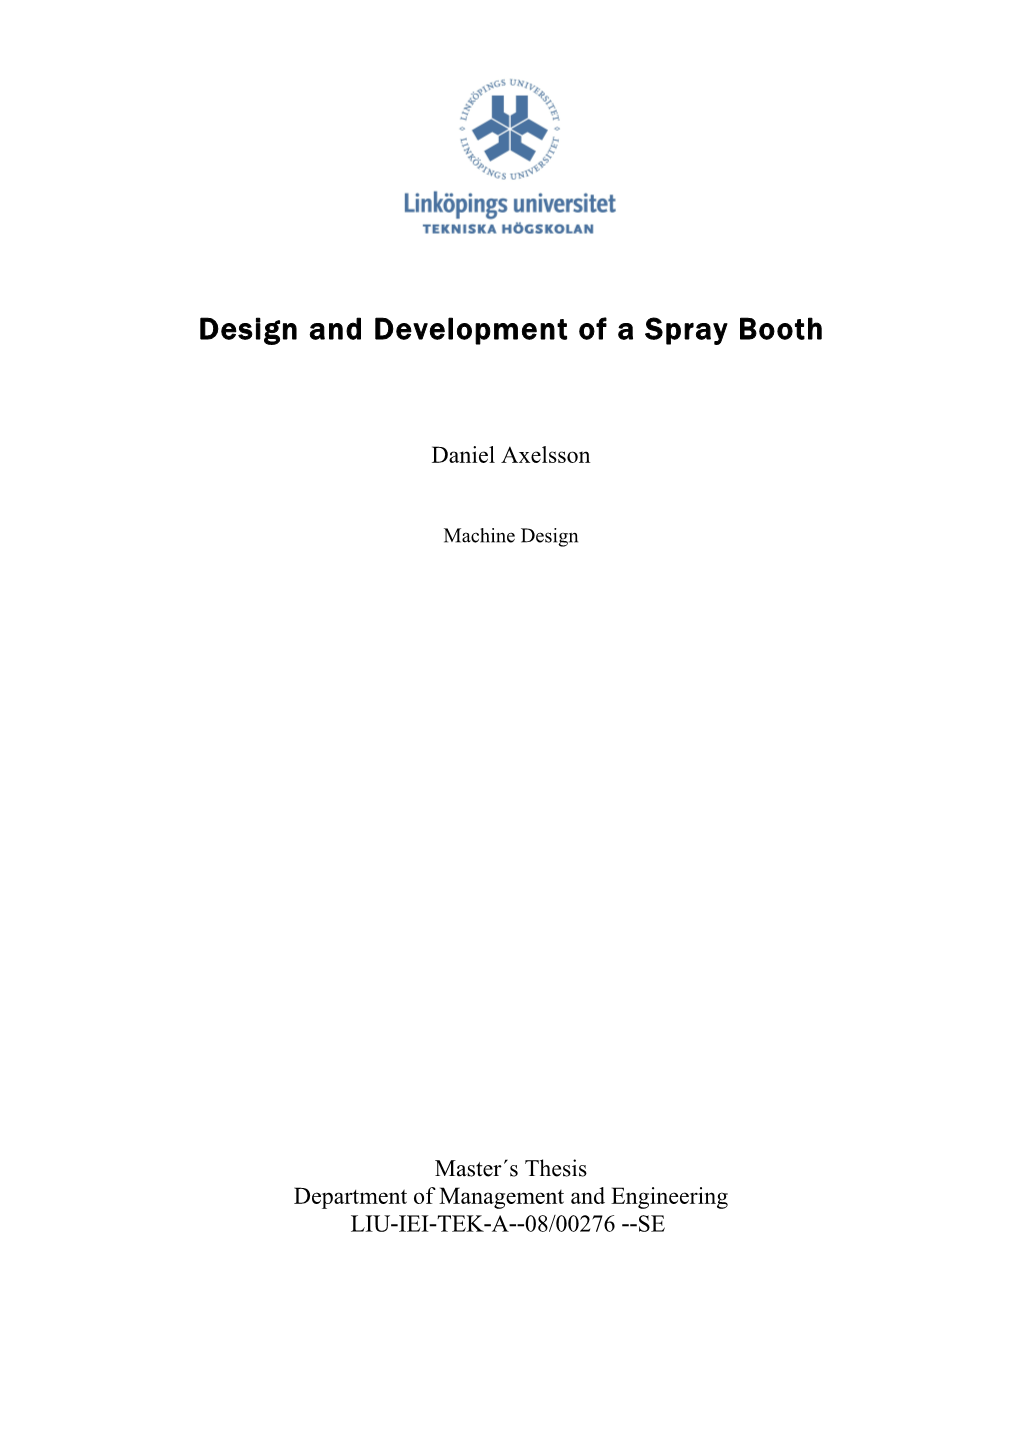 Design and Development of a Spray Booth